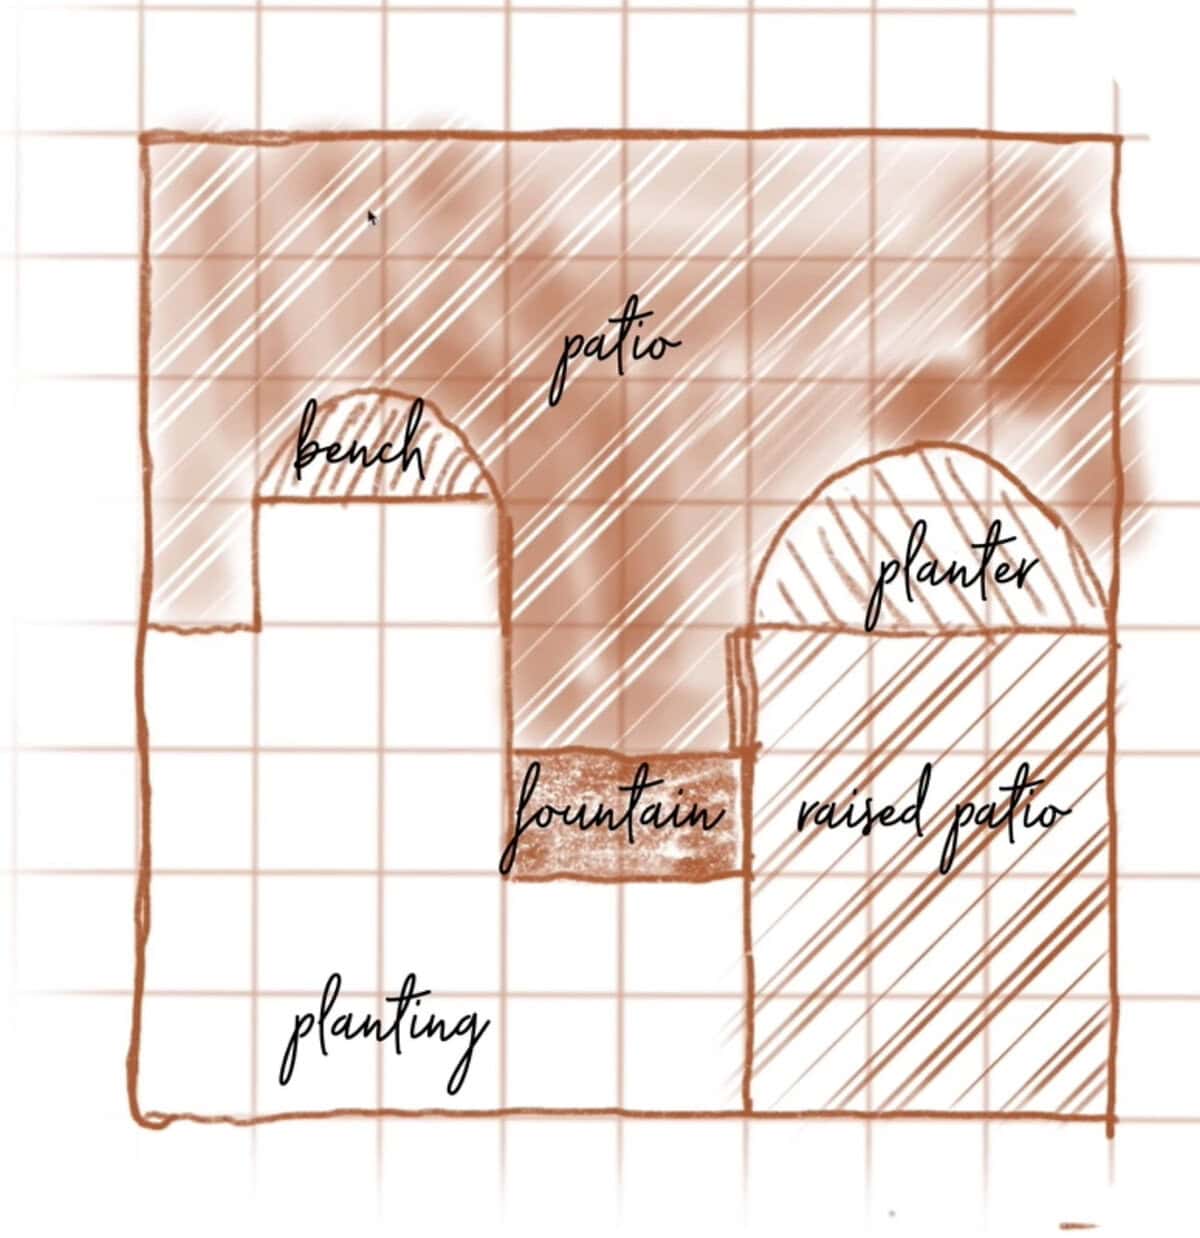 A hand-drawn patio plan showcasing garden design basics, with labeled areas: bench, planter, fountain, patio, raised patio, and planting. The layout has a grid background and uses different shading patterns for each section to distinguish between features.